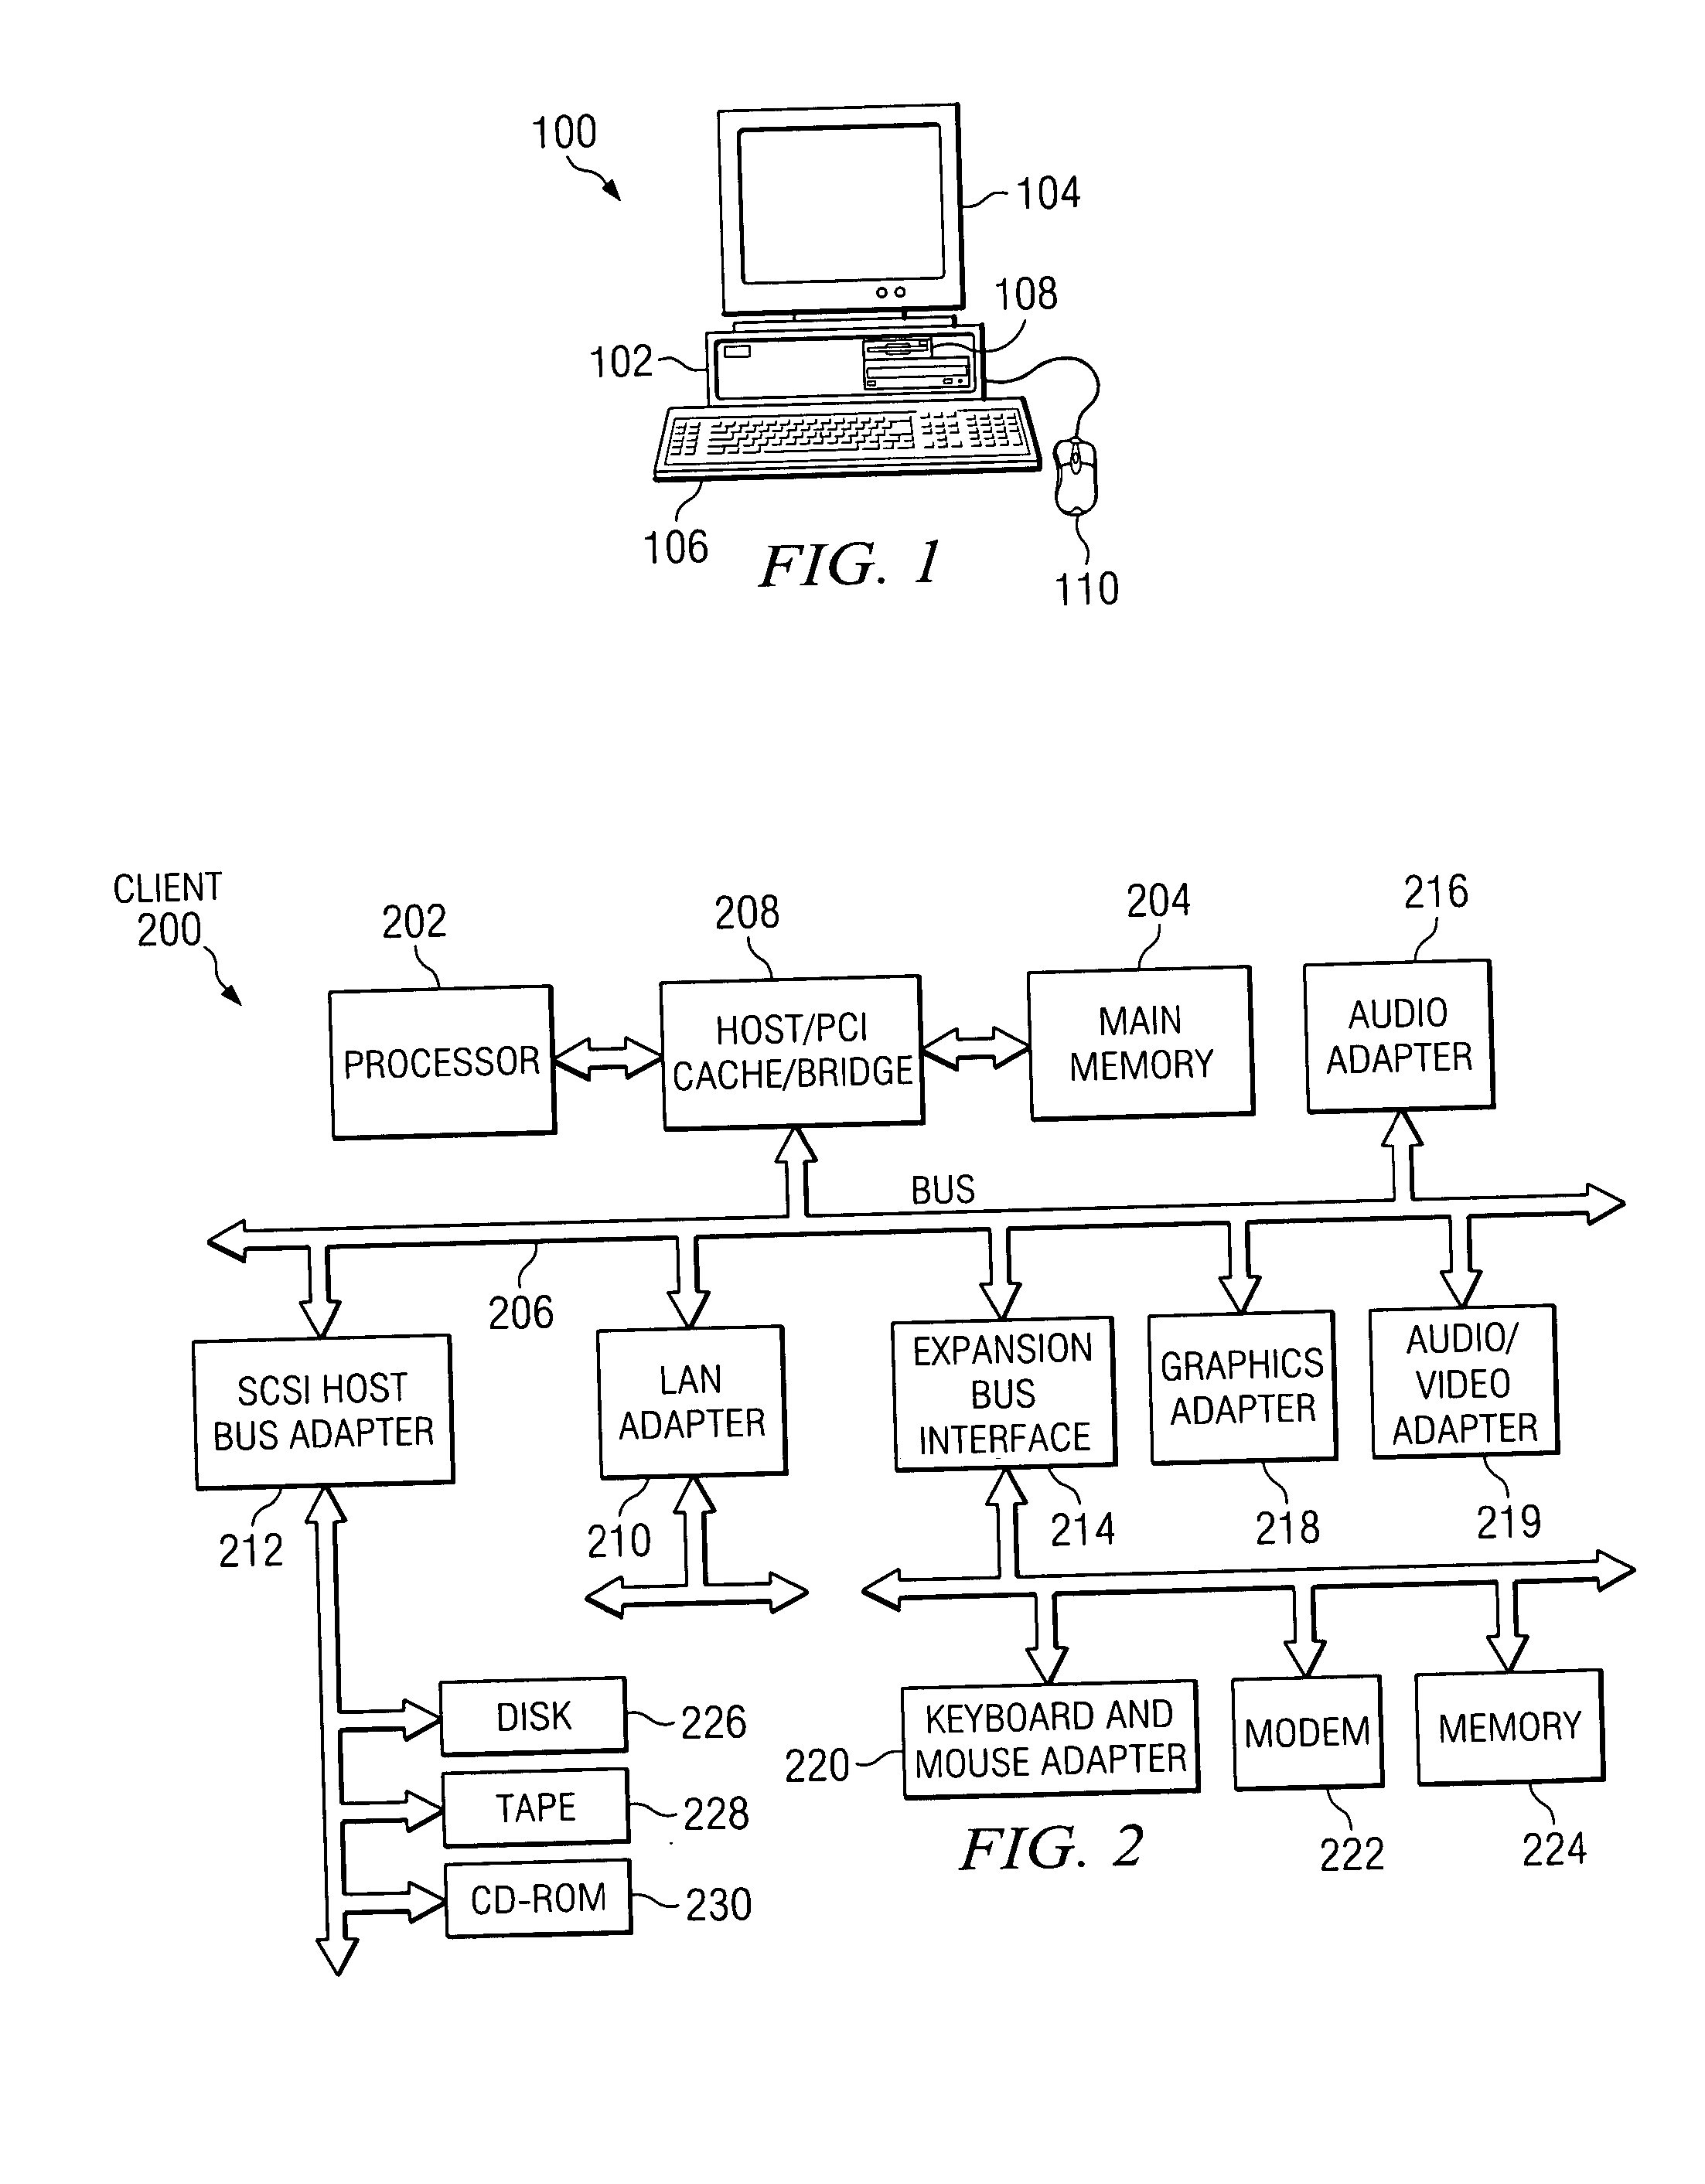 Method and apparatus for identifying a Java class package name without disassembling Java bytecodes